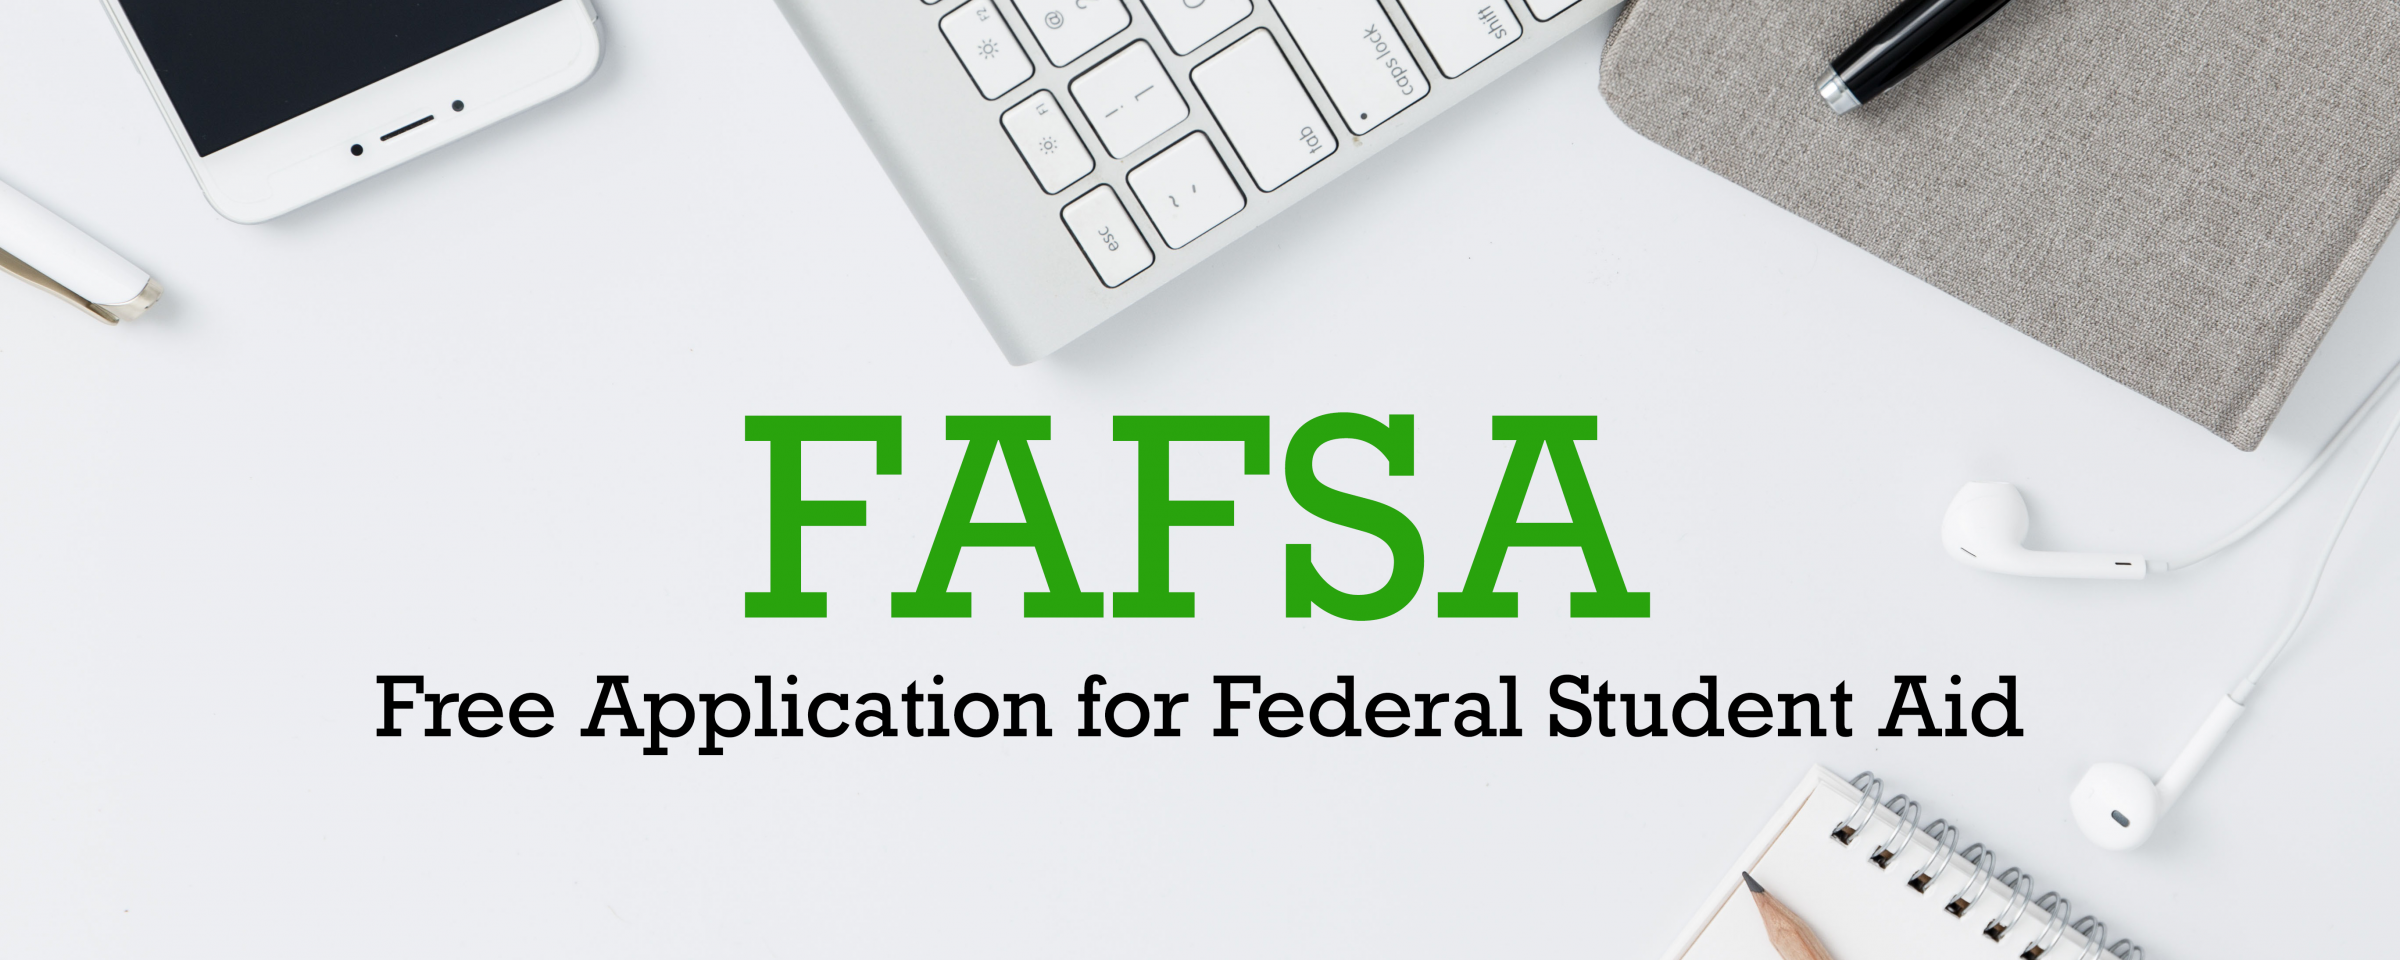 What's a FAFSA and Why Should You Care? | GEAR UP